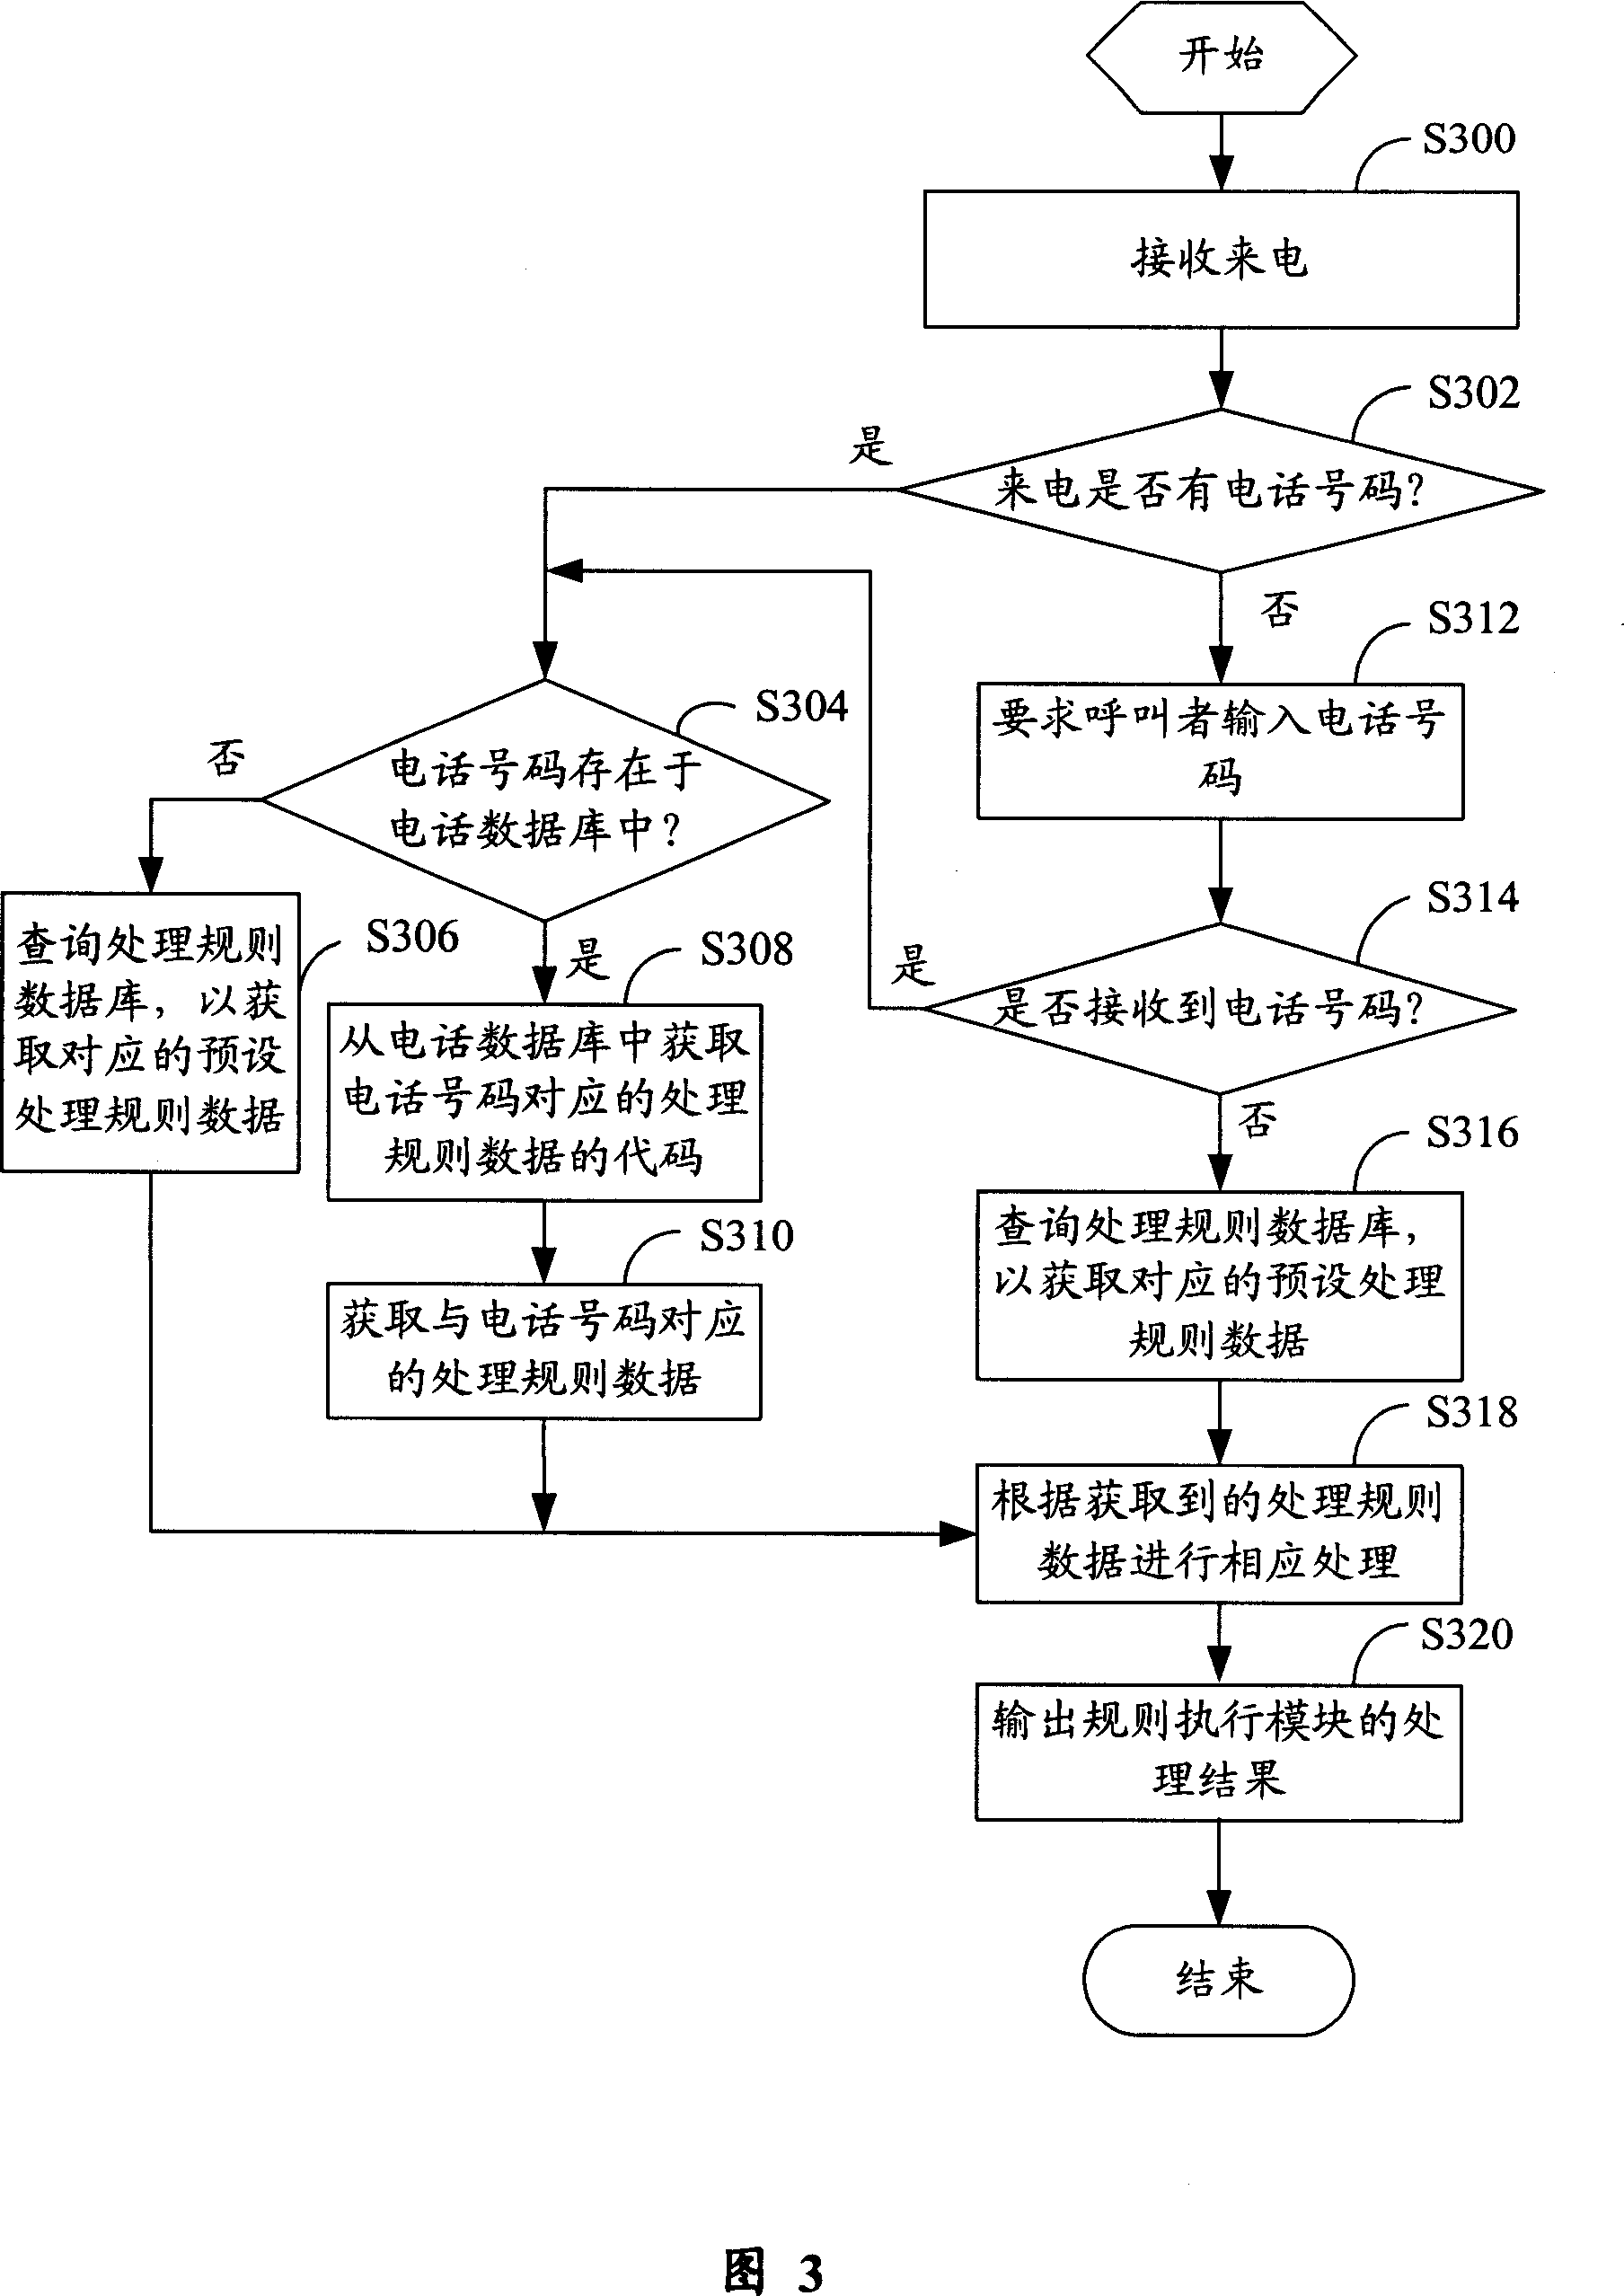 Telephone filter system and method